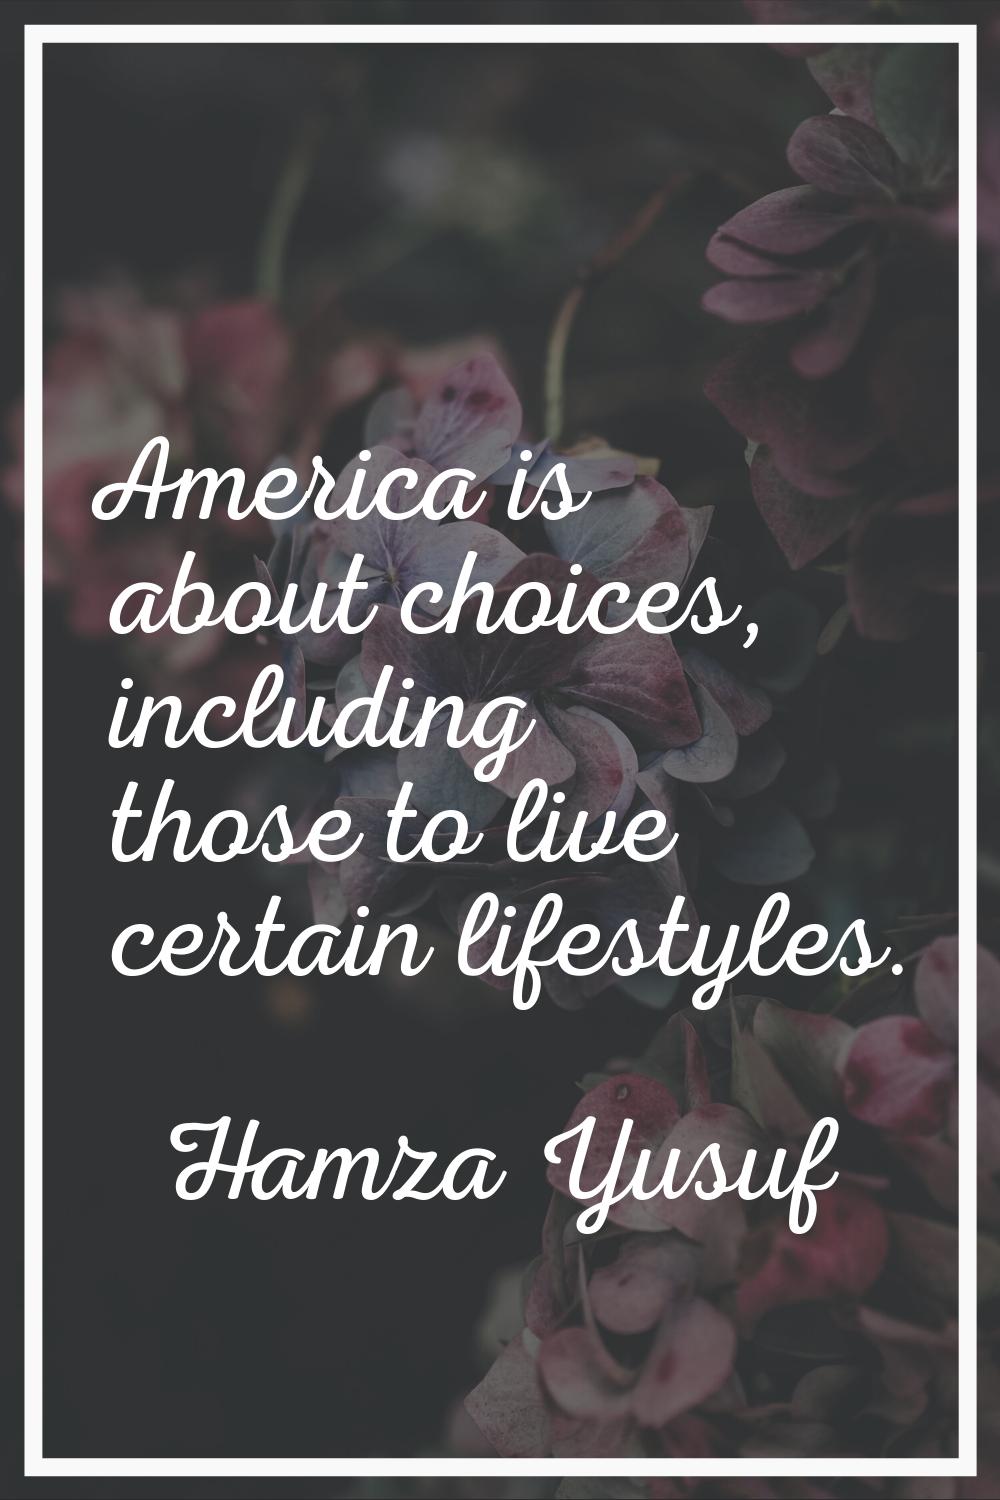 America is about choices, including those to live certain lifestyles.